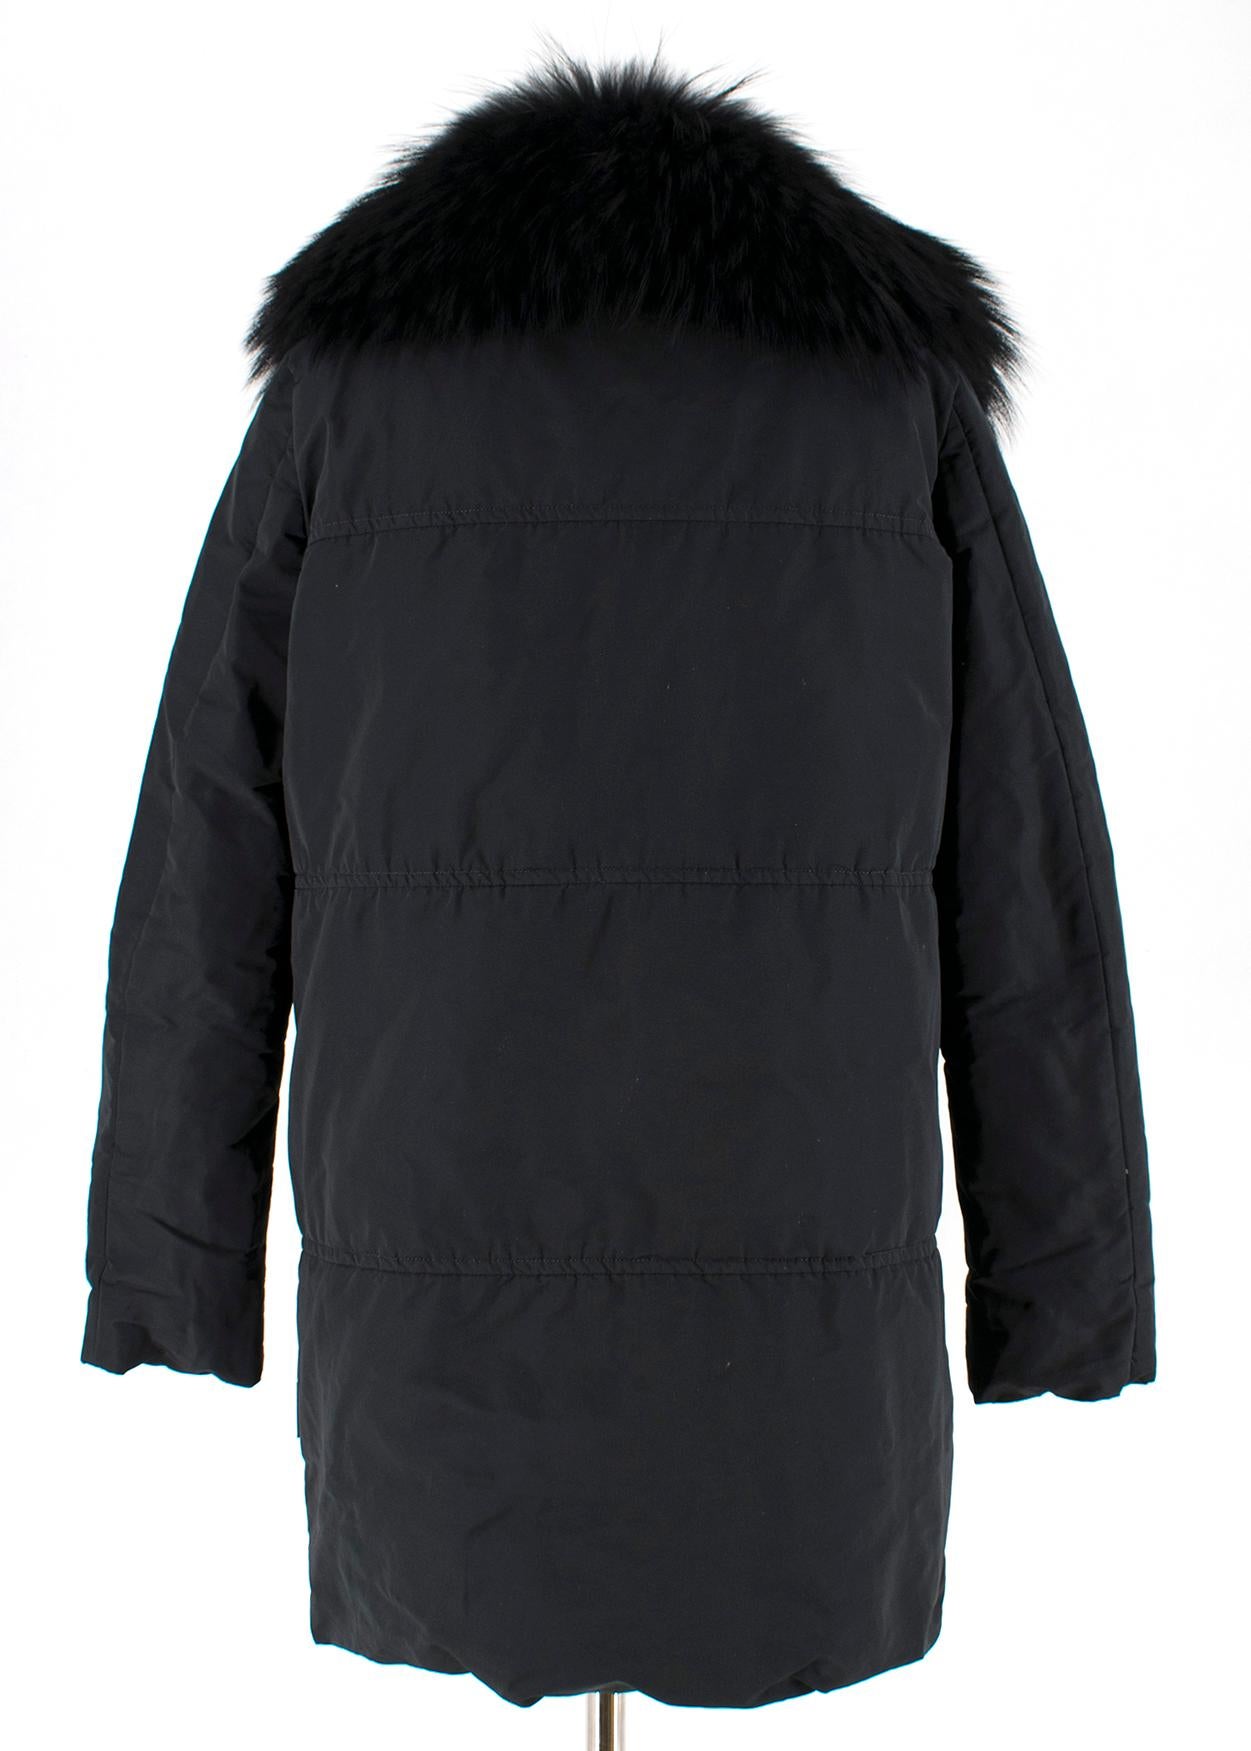 Moncler Black Down Coat with Fur Collar - Size M  In Excellent Condition For Sale In London, GB